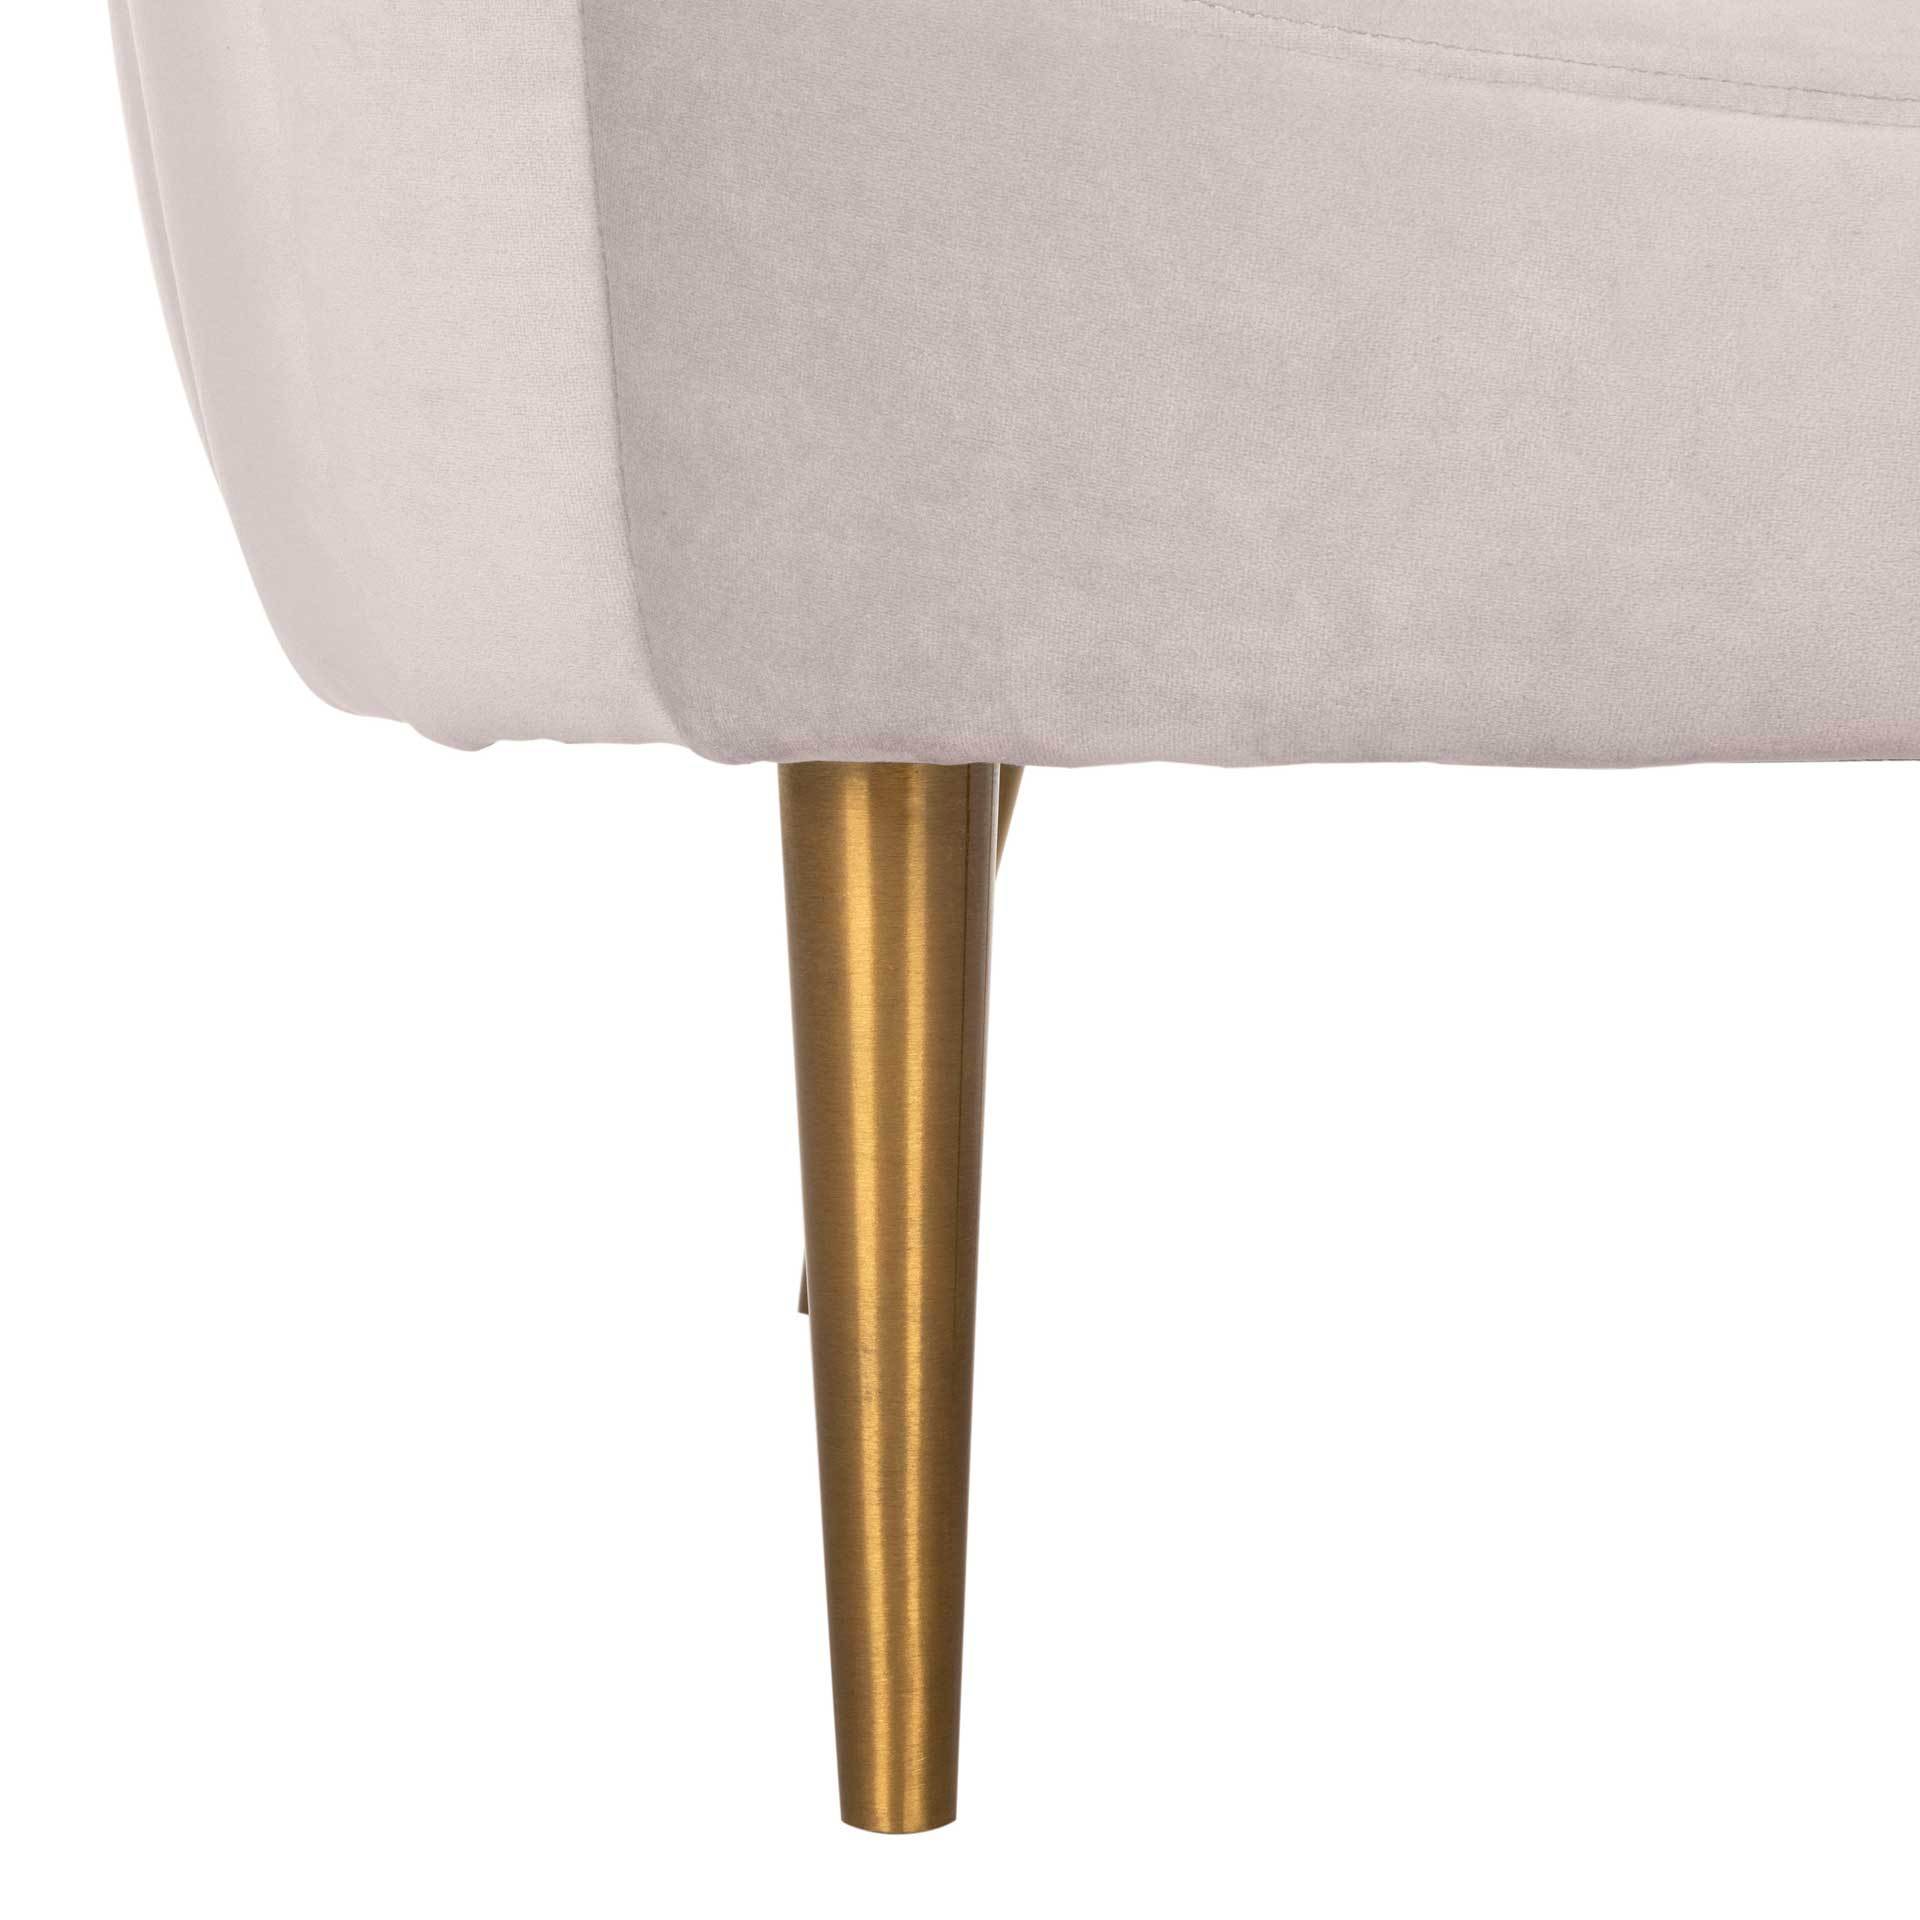 Raymond Channel Tufted Tub Chair Pale Taupe/Gold